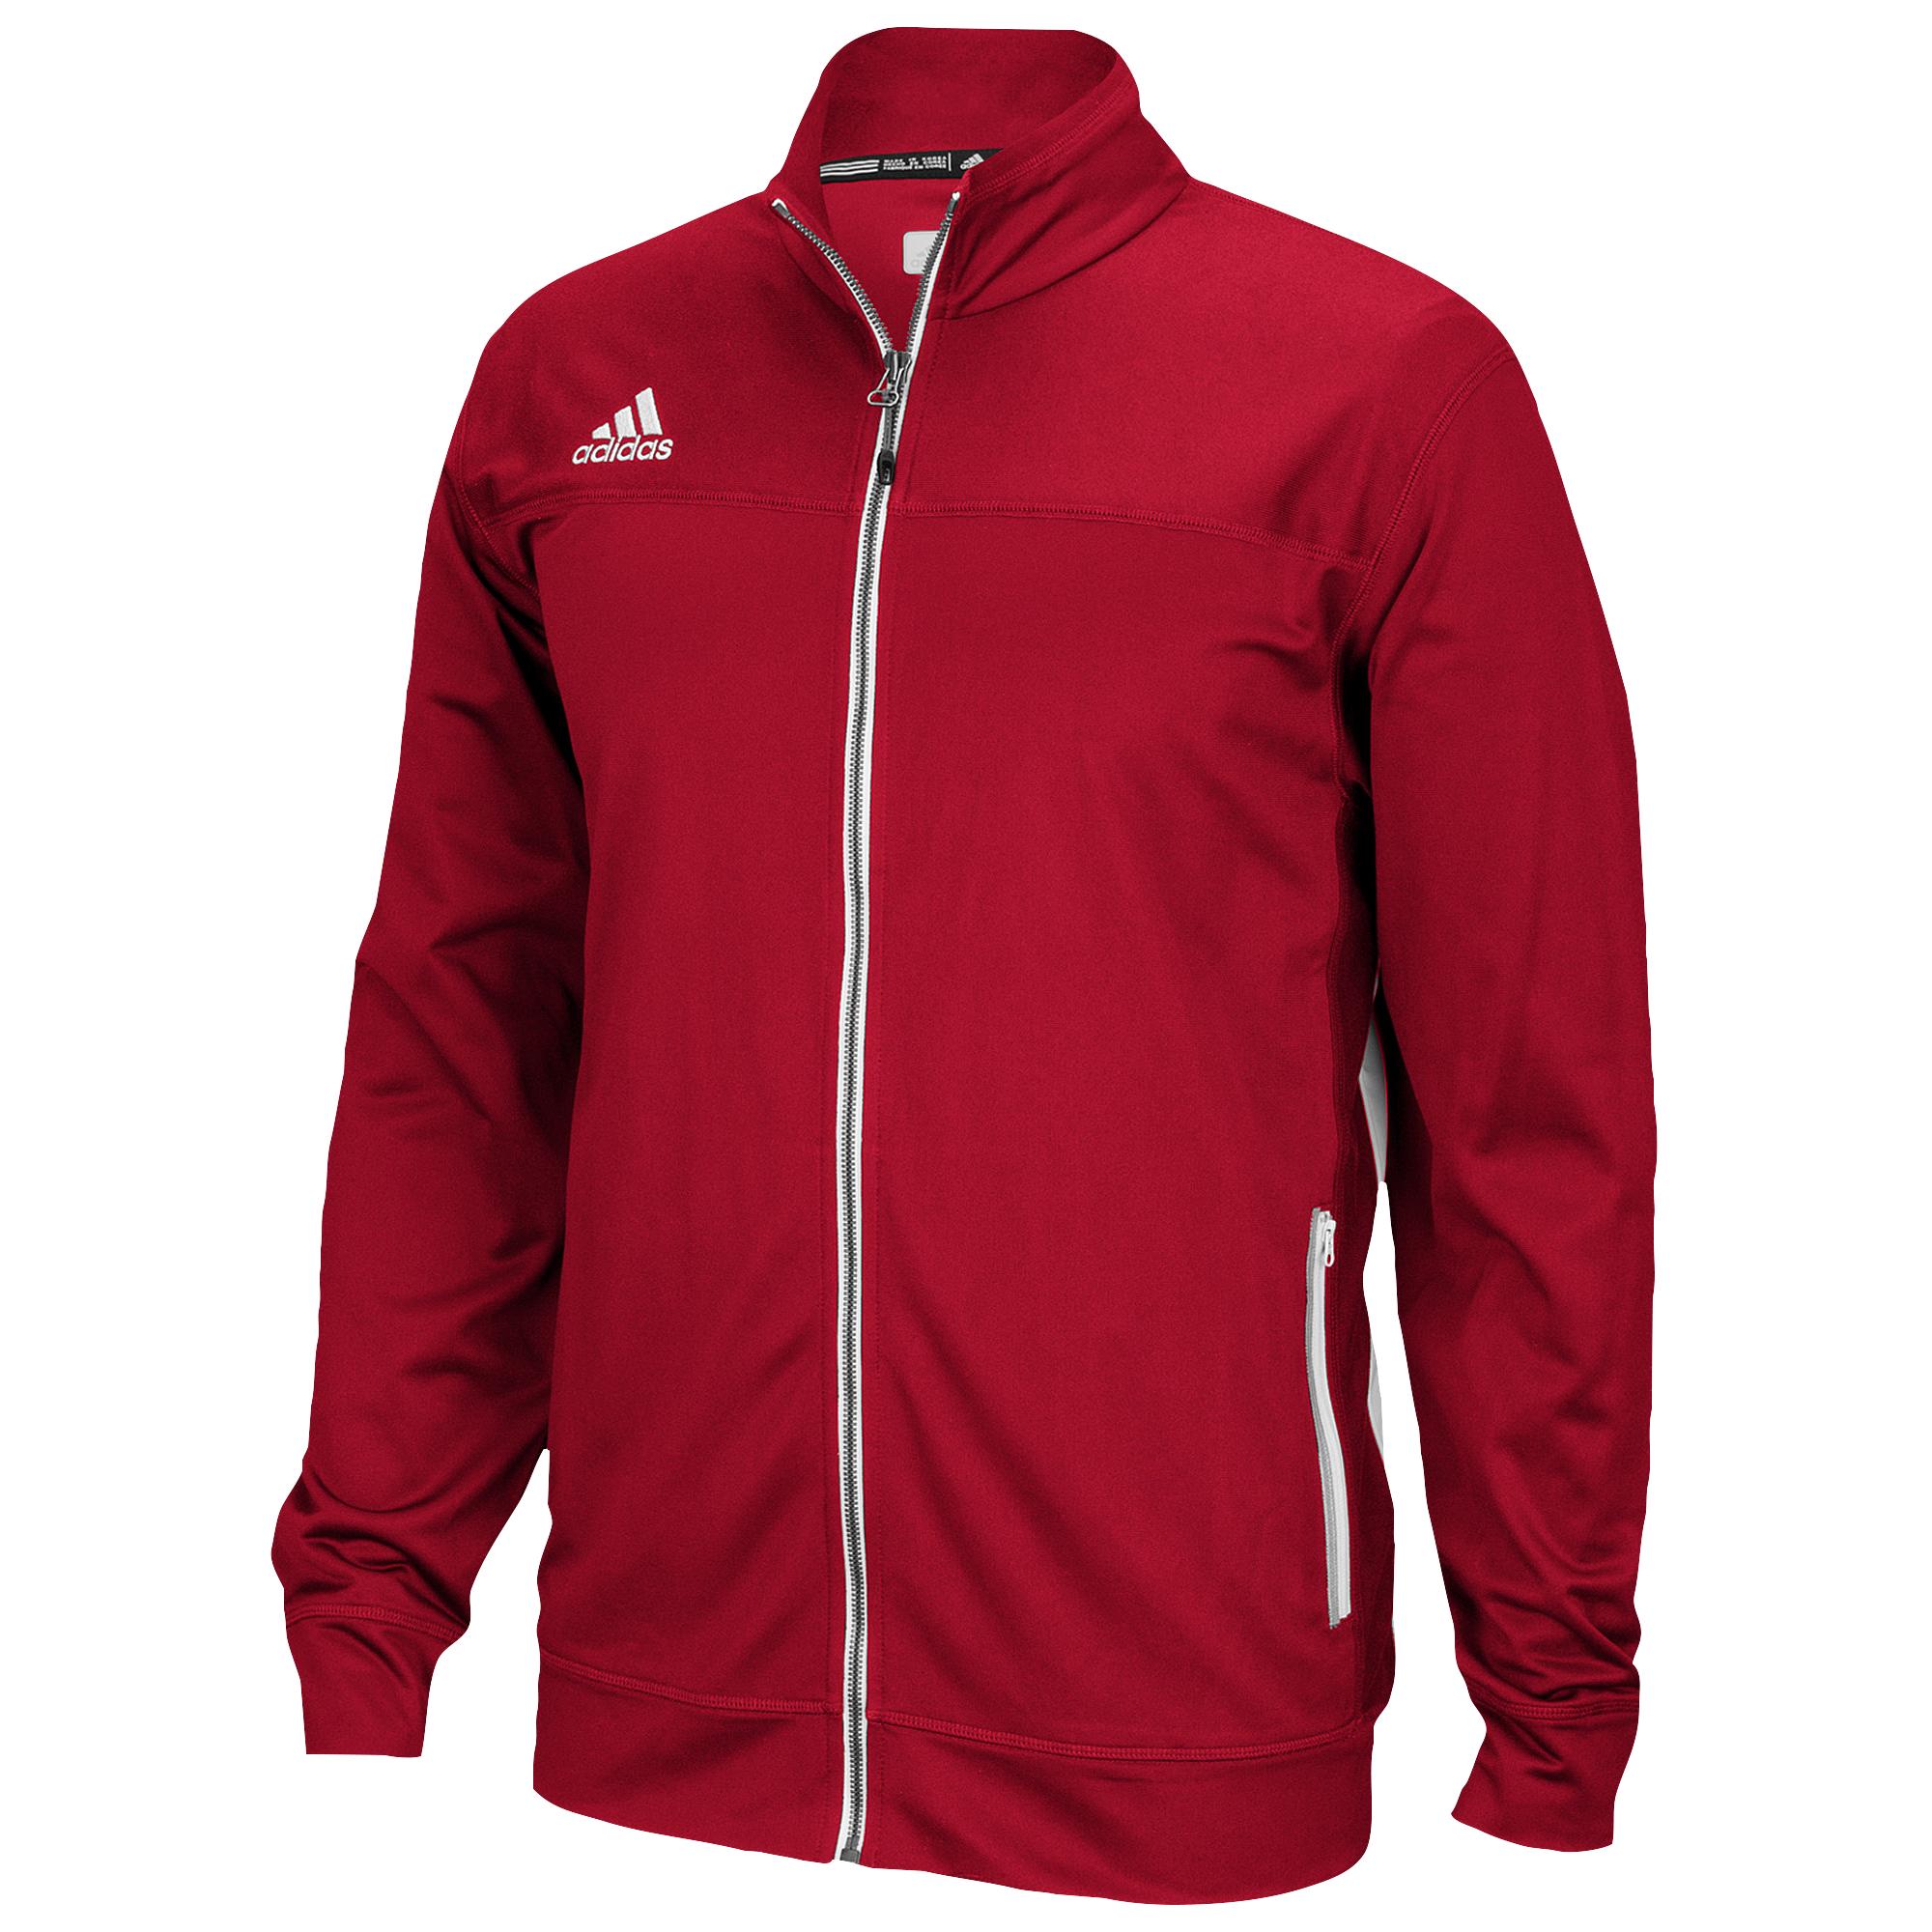 adidas Team Utility Jacket in Red for Men - Lyst